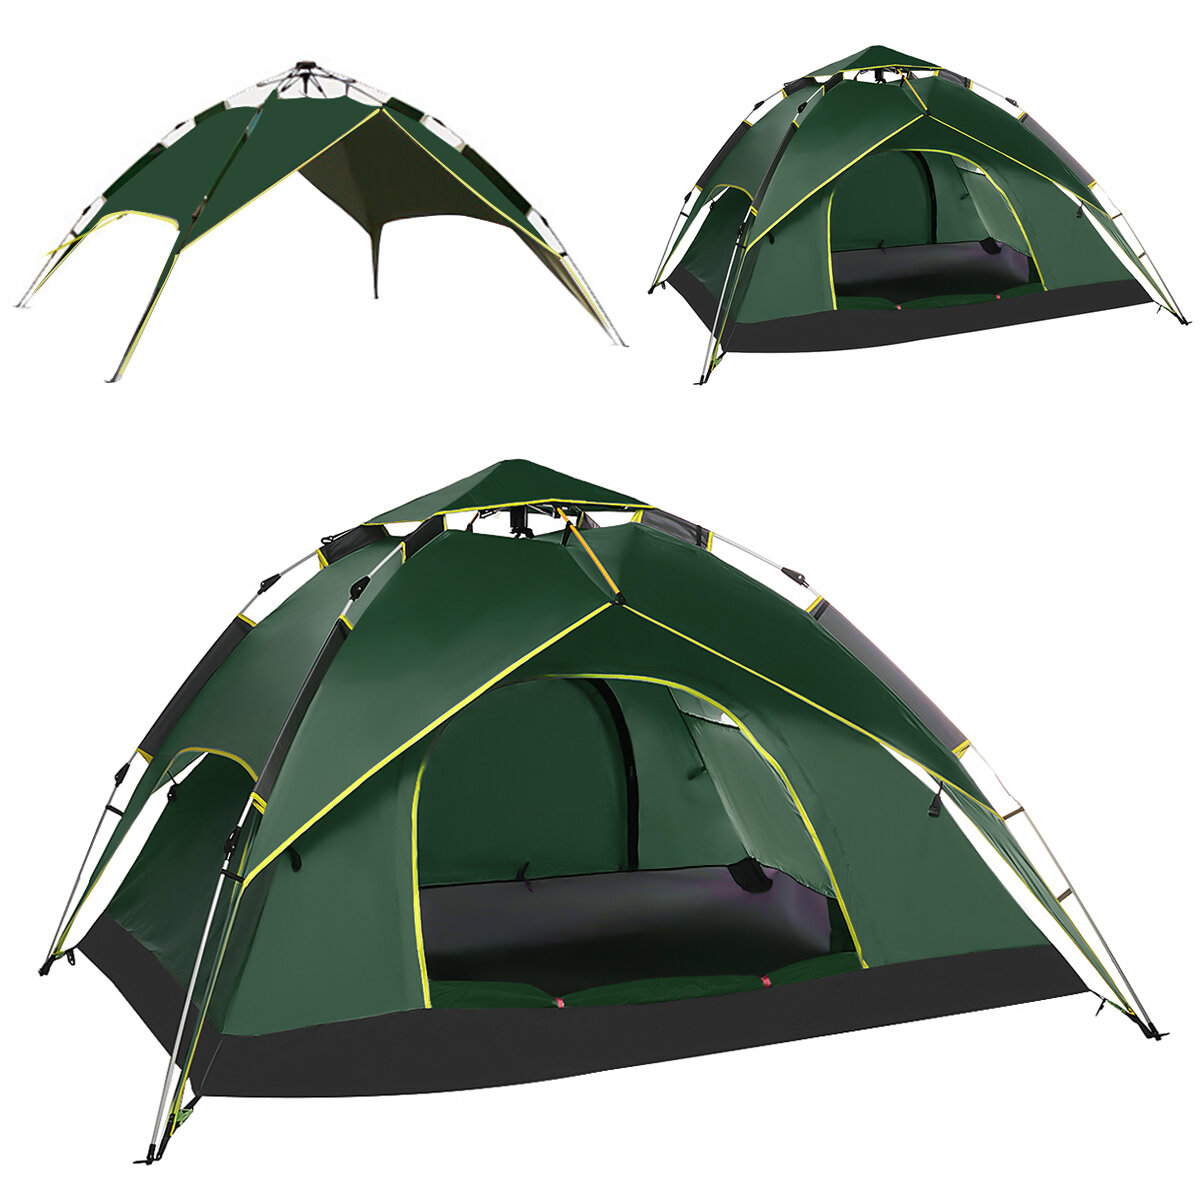 4-5 People Automatic Family Camping Tent Ultralight Sunshade Canopy Awning Outdoor Travel